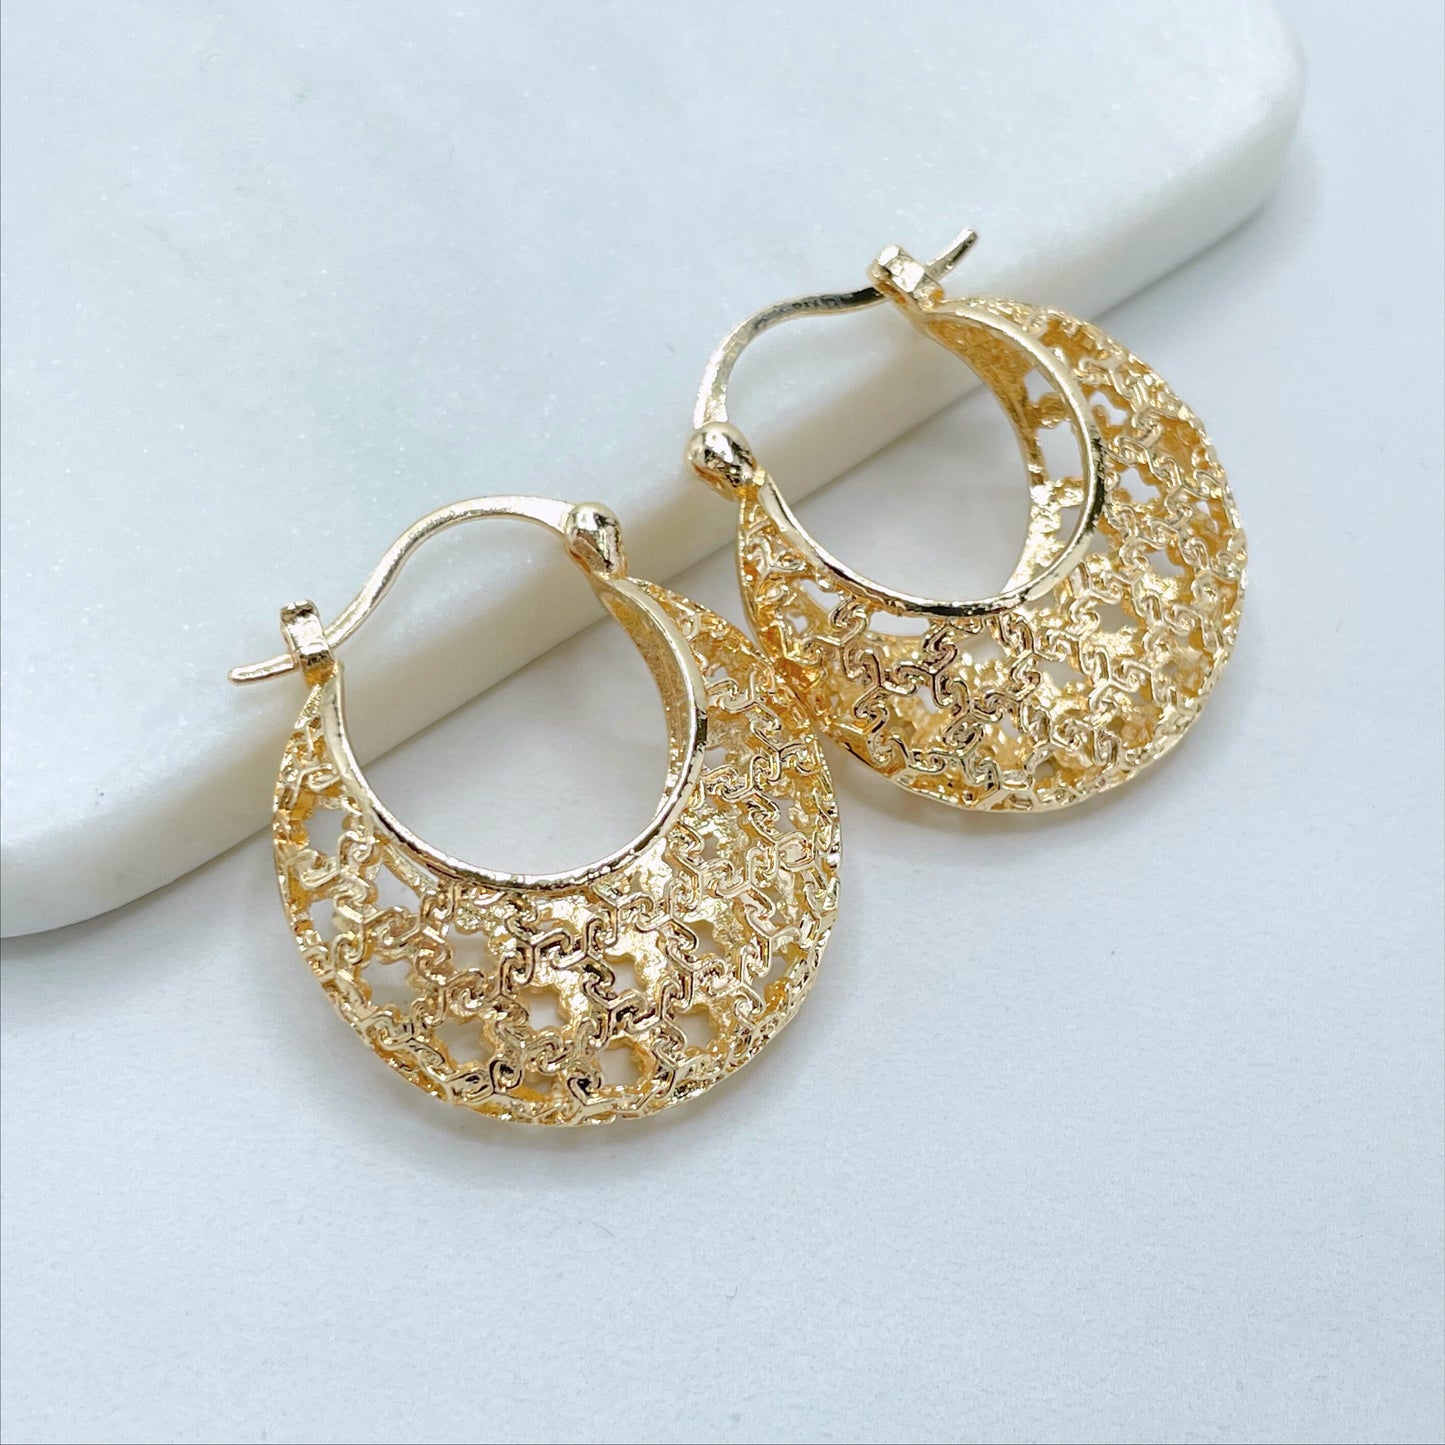 18k Gold Filled  29mm Texturized Cutout Basket Design Earrings, 11mm Thickness, Wholesale Jewelry Making Supplies